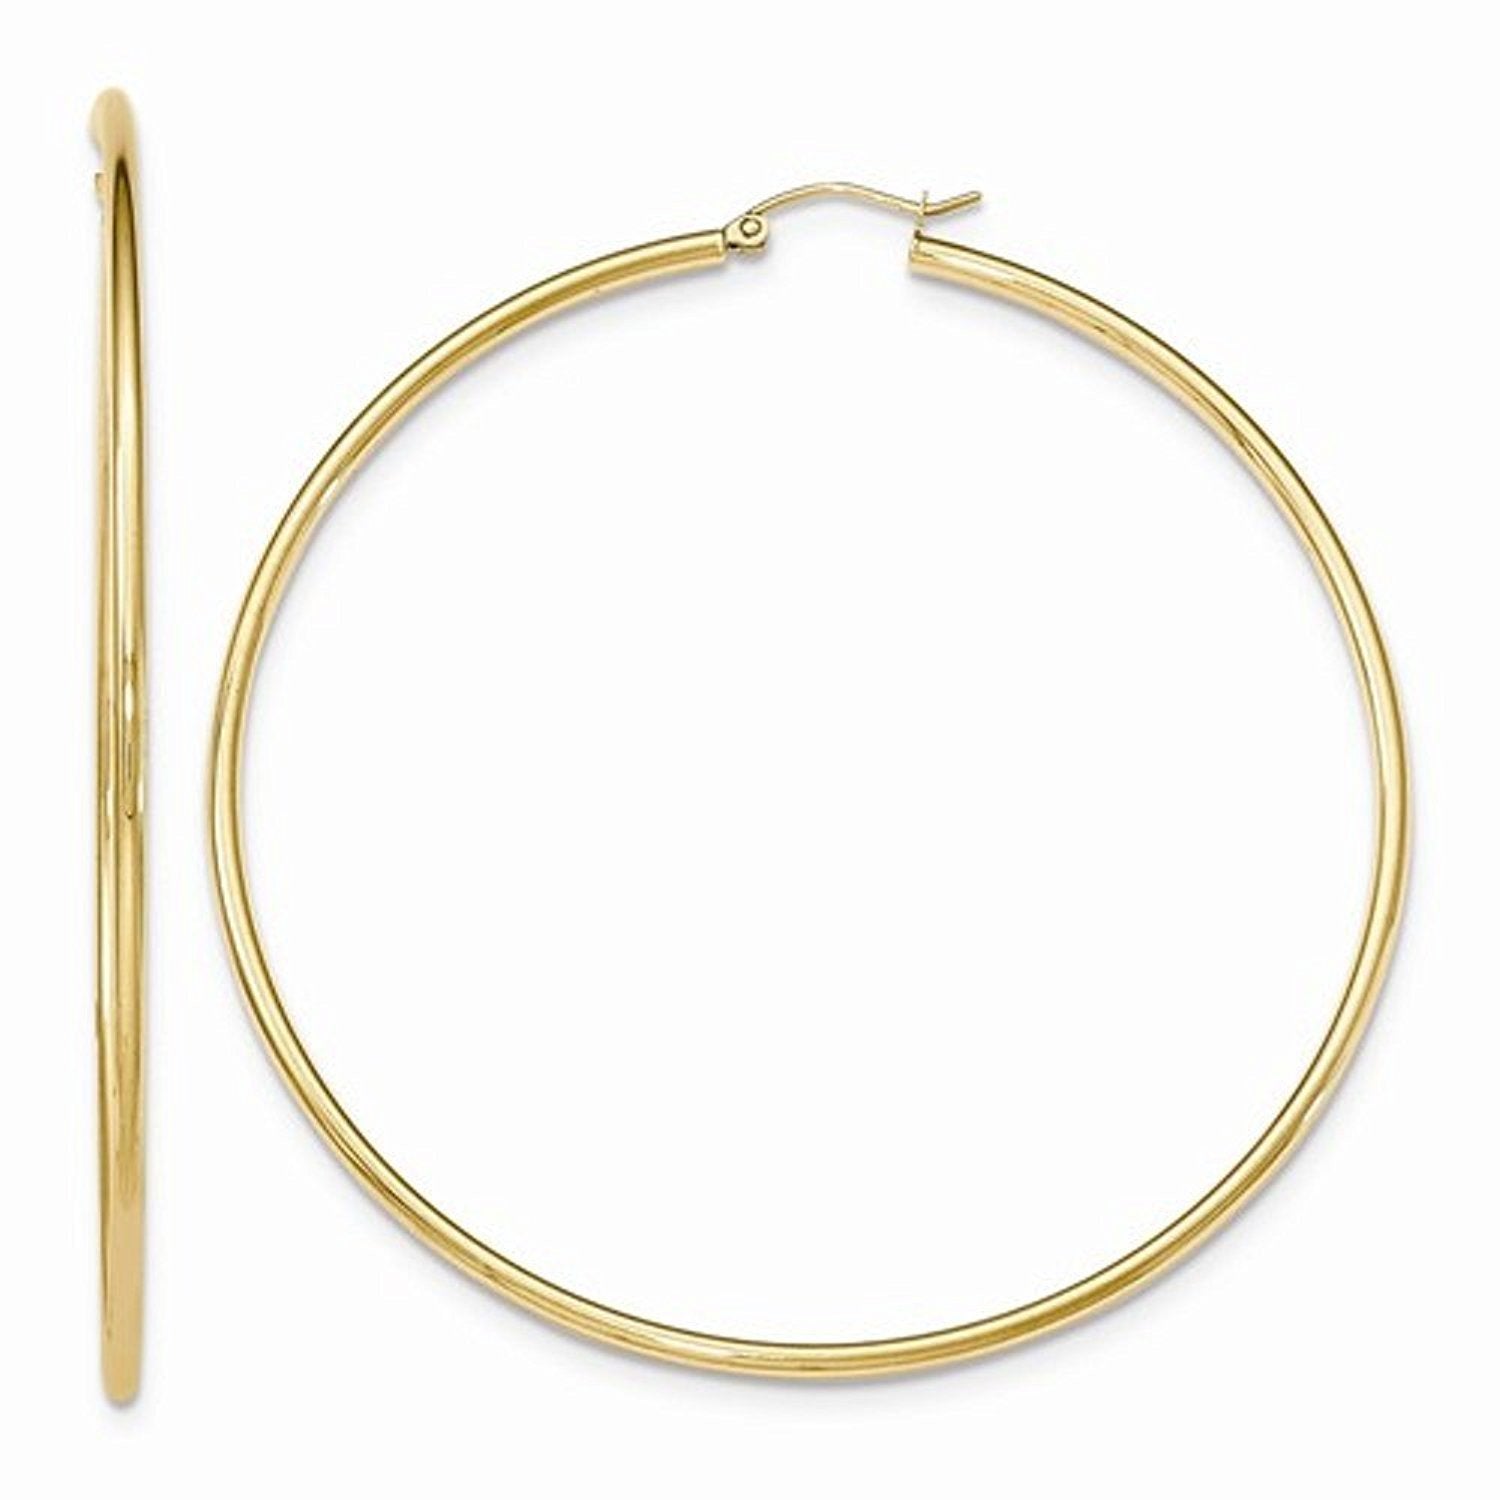 14K Yellow Gold Classic Round Extra Large Hoop Earrings 69mm x 2mm